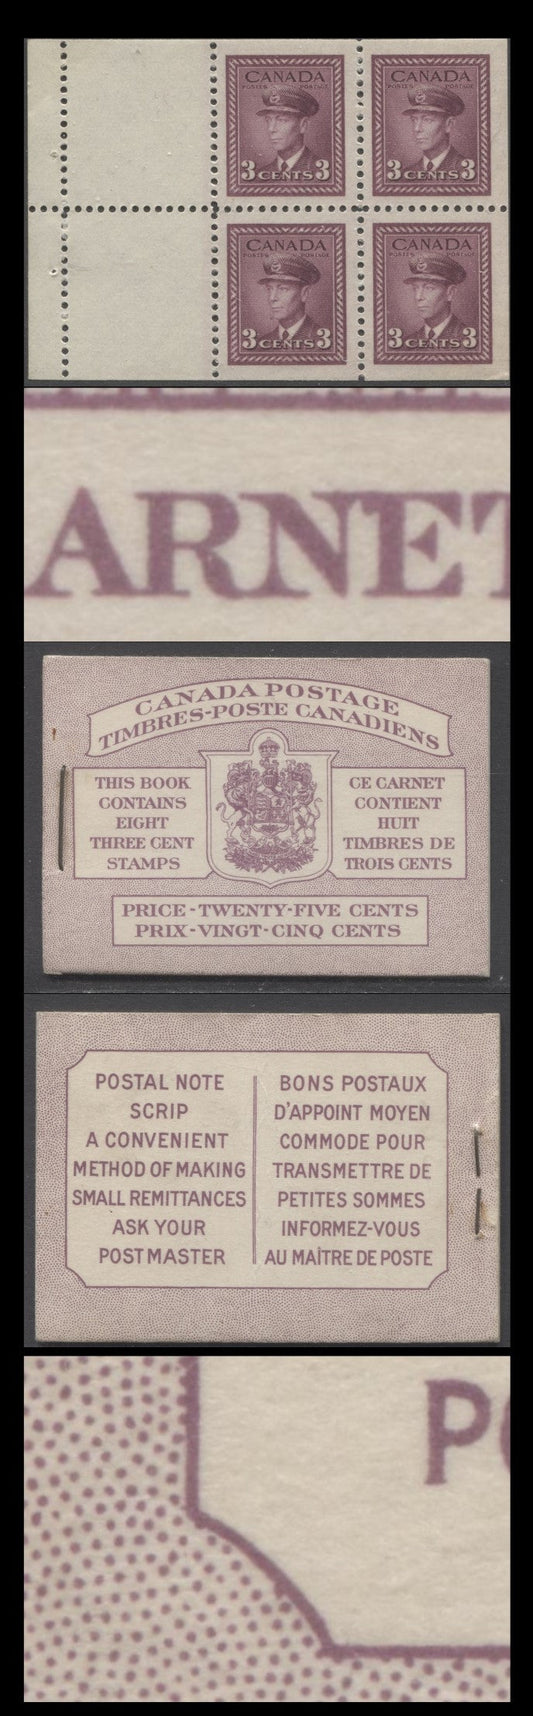 Lot 96 Canada #BK35dB 1942-1947 War Issue, A Complete 25c Bilingual Booklet, 2 Panes Of 4+2 Labels 3c Rose Violet, Front Cover IIIc, Back Cover Fai, Type II, 7c & 5c Rates Page, 407,000 Issued